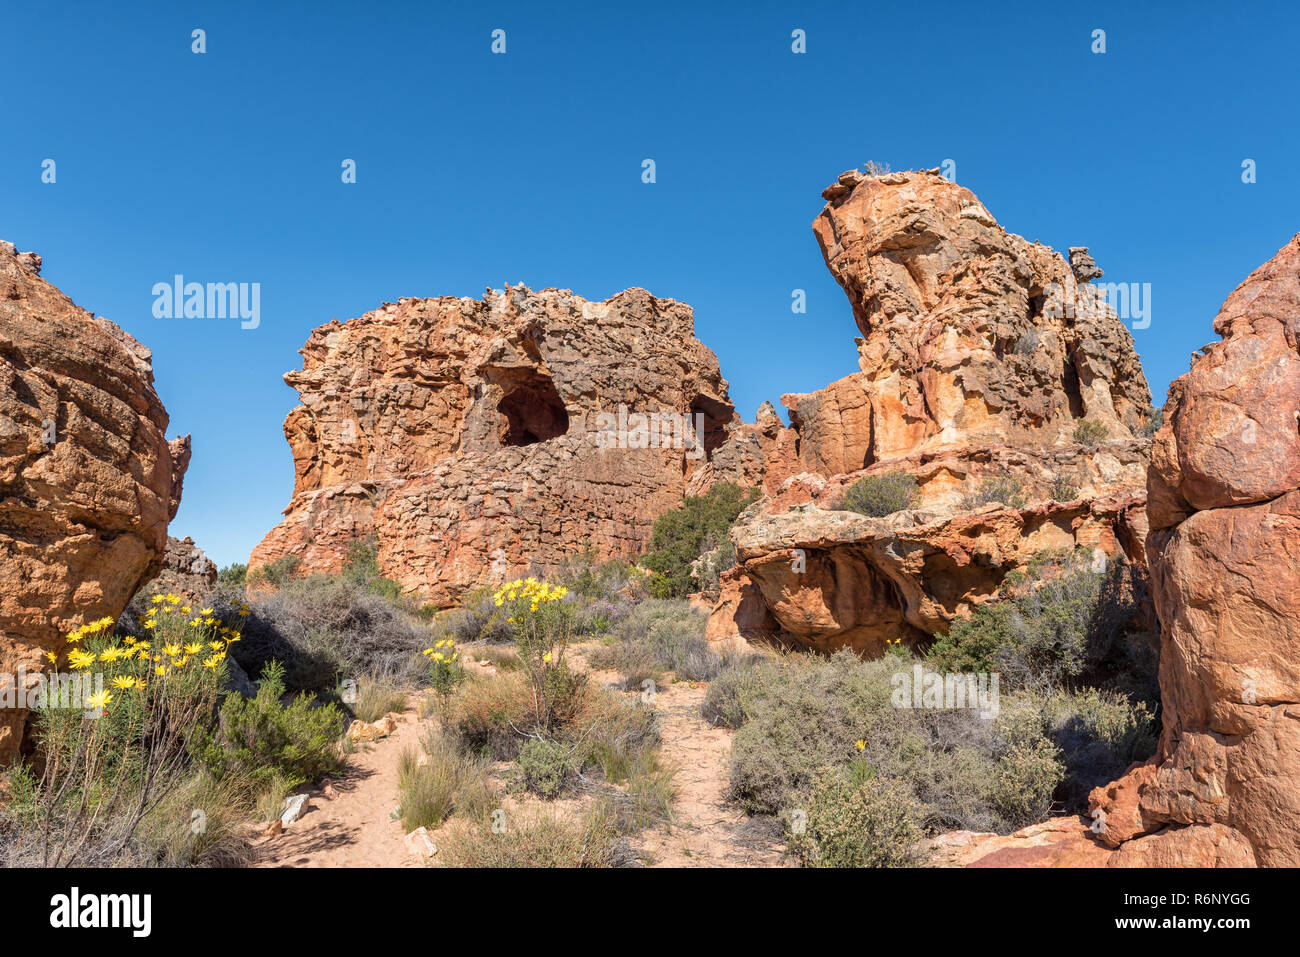 Rock formations and wild flowers at the Stadsaal Caves and Rock Art site in the Cederberg Mountains in the Western Cape Province of South Africa Stock Photo